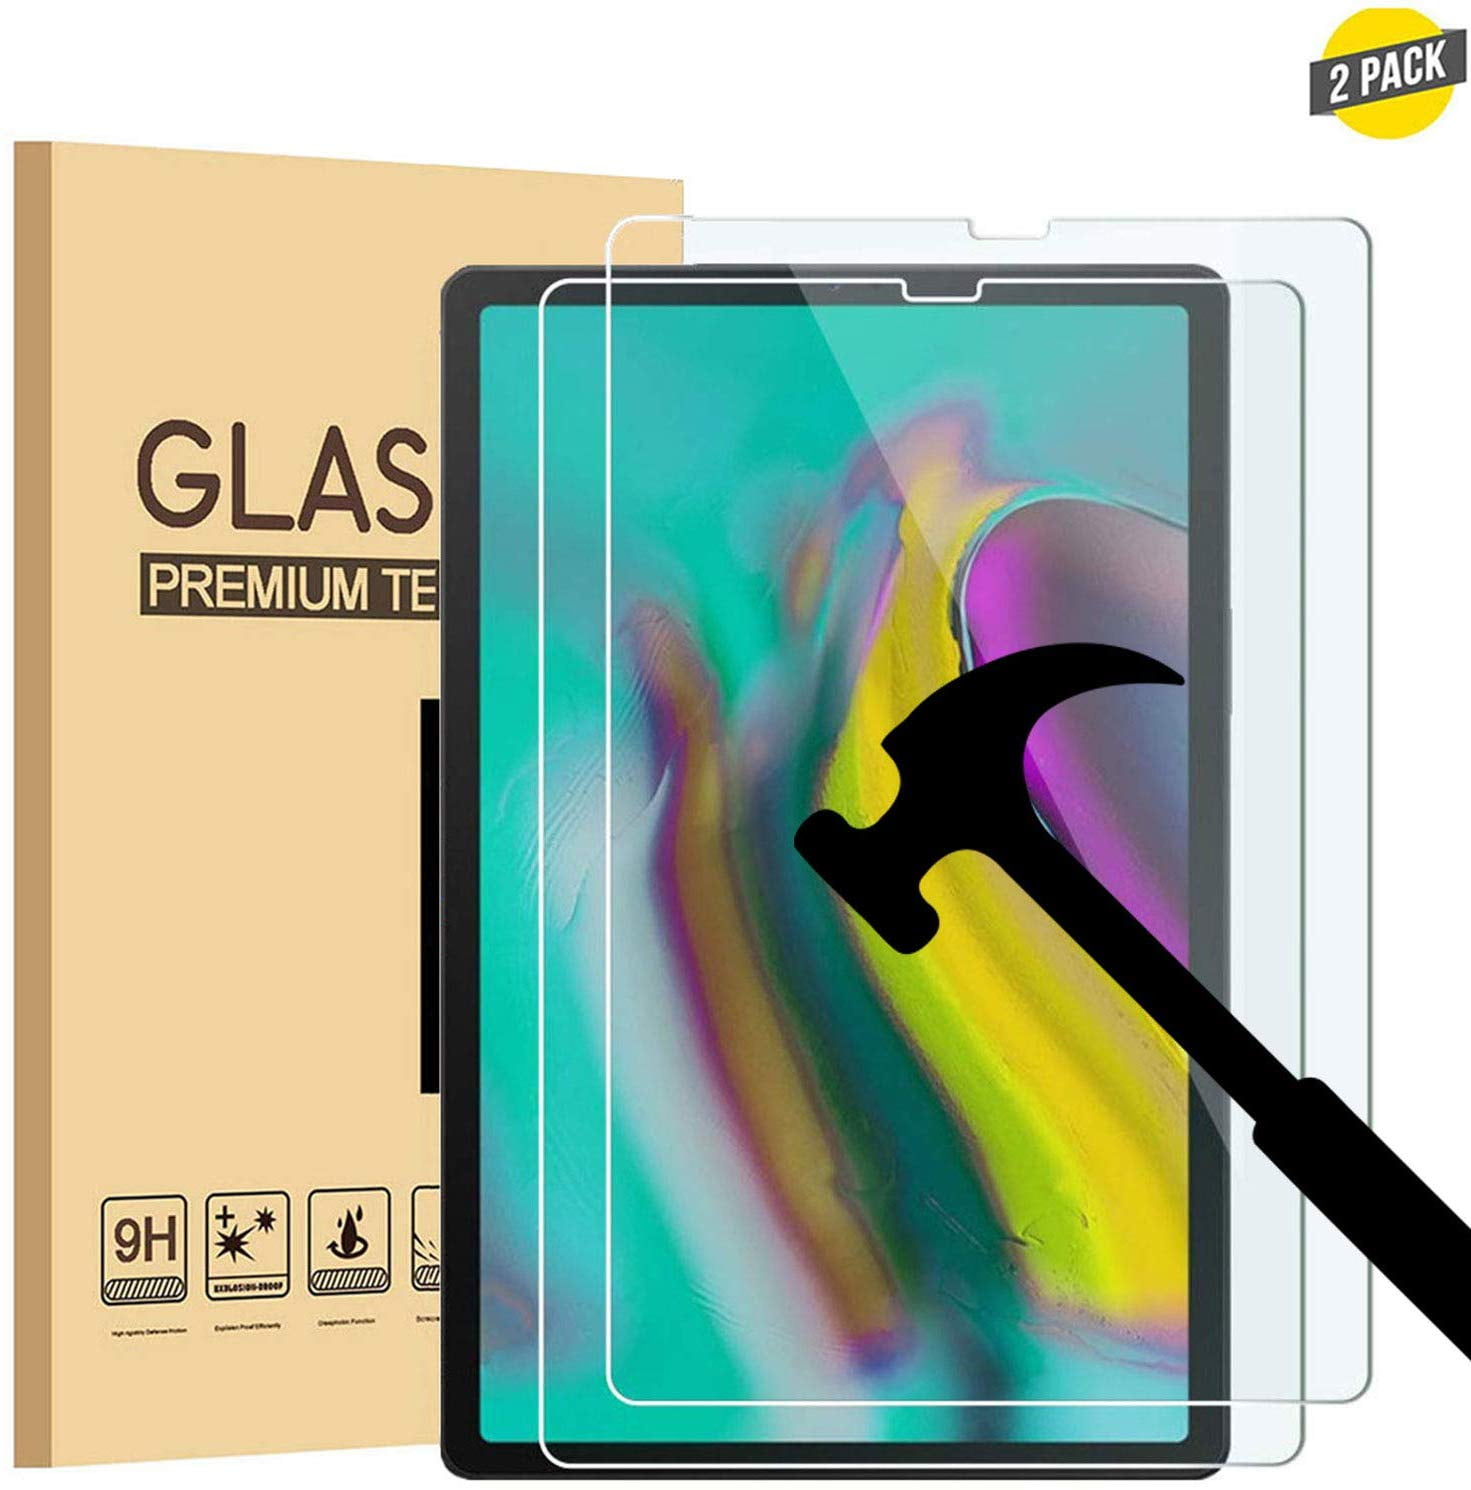 [2 Pack] EpicGadget for Galaxy Tab S6 10.5